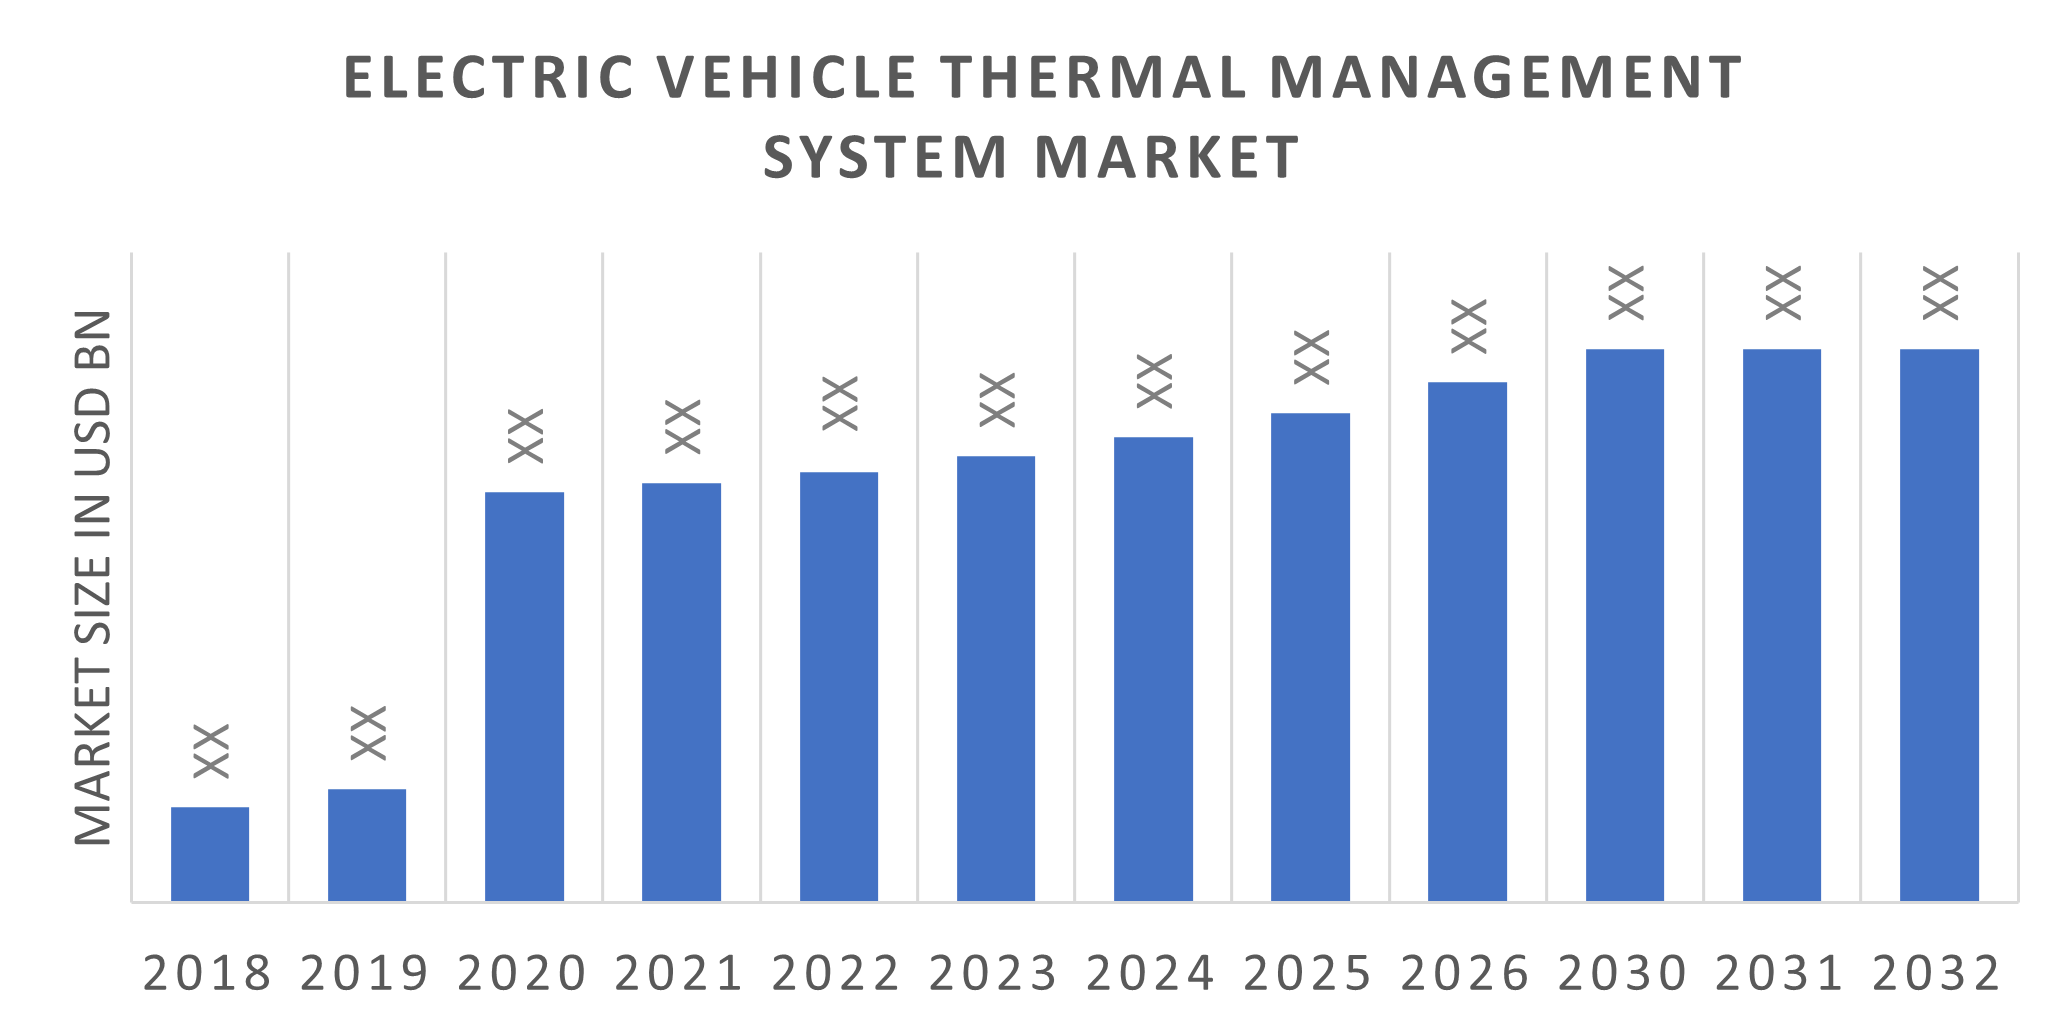 Global Electric Vehicle Thermal Management System Market Overview